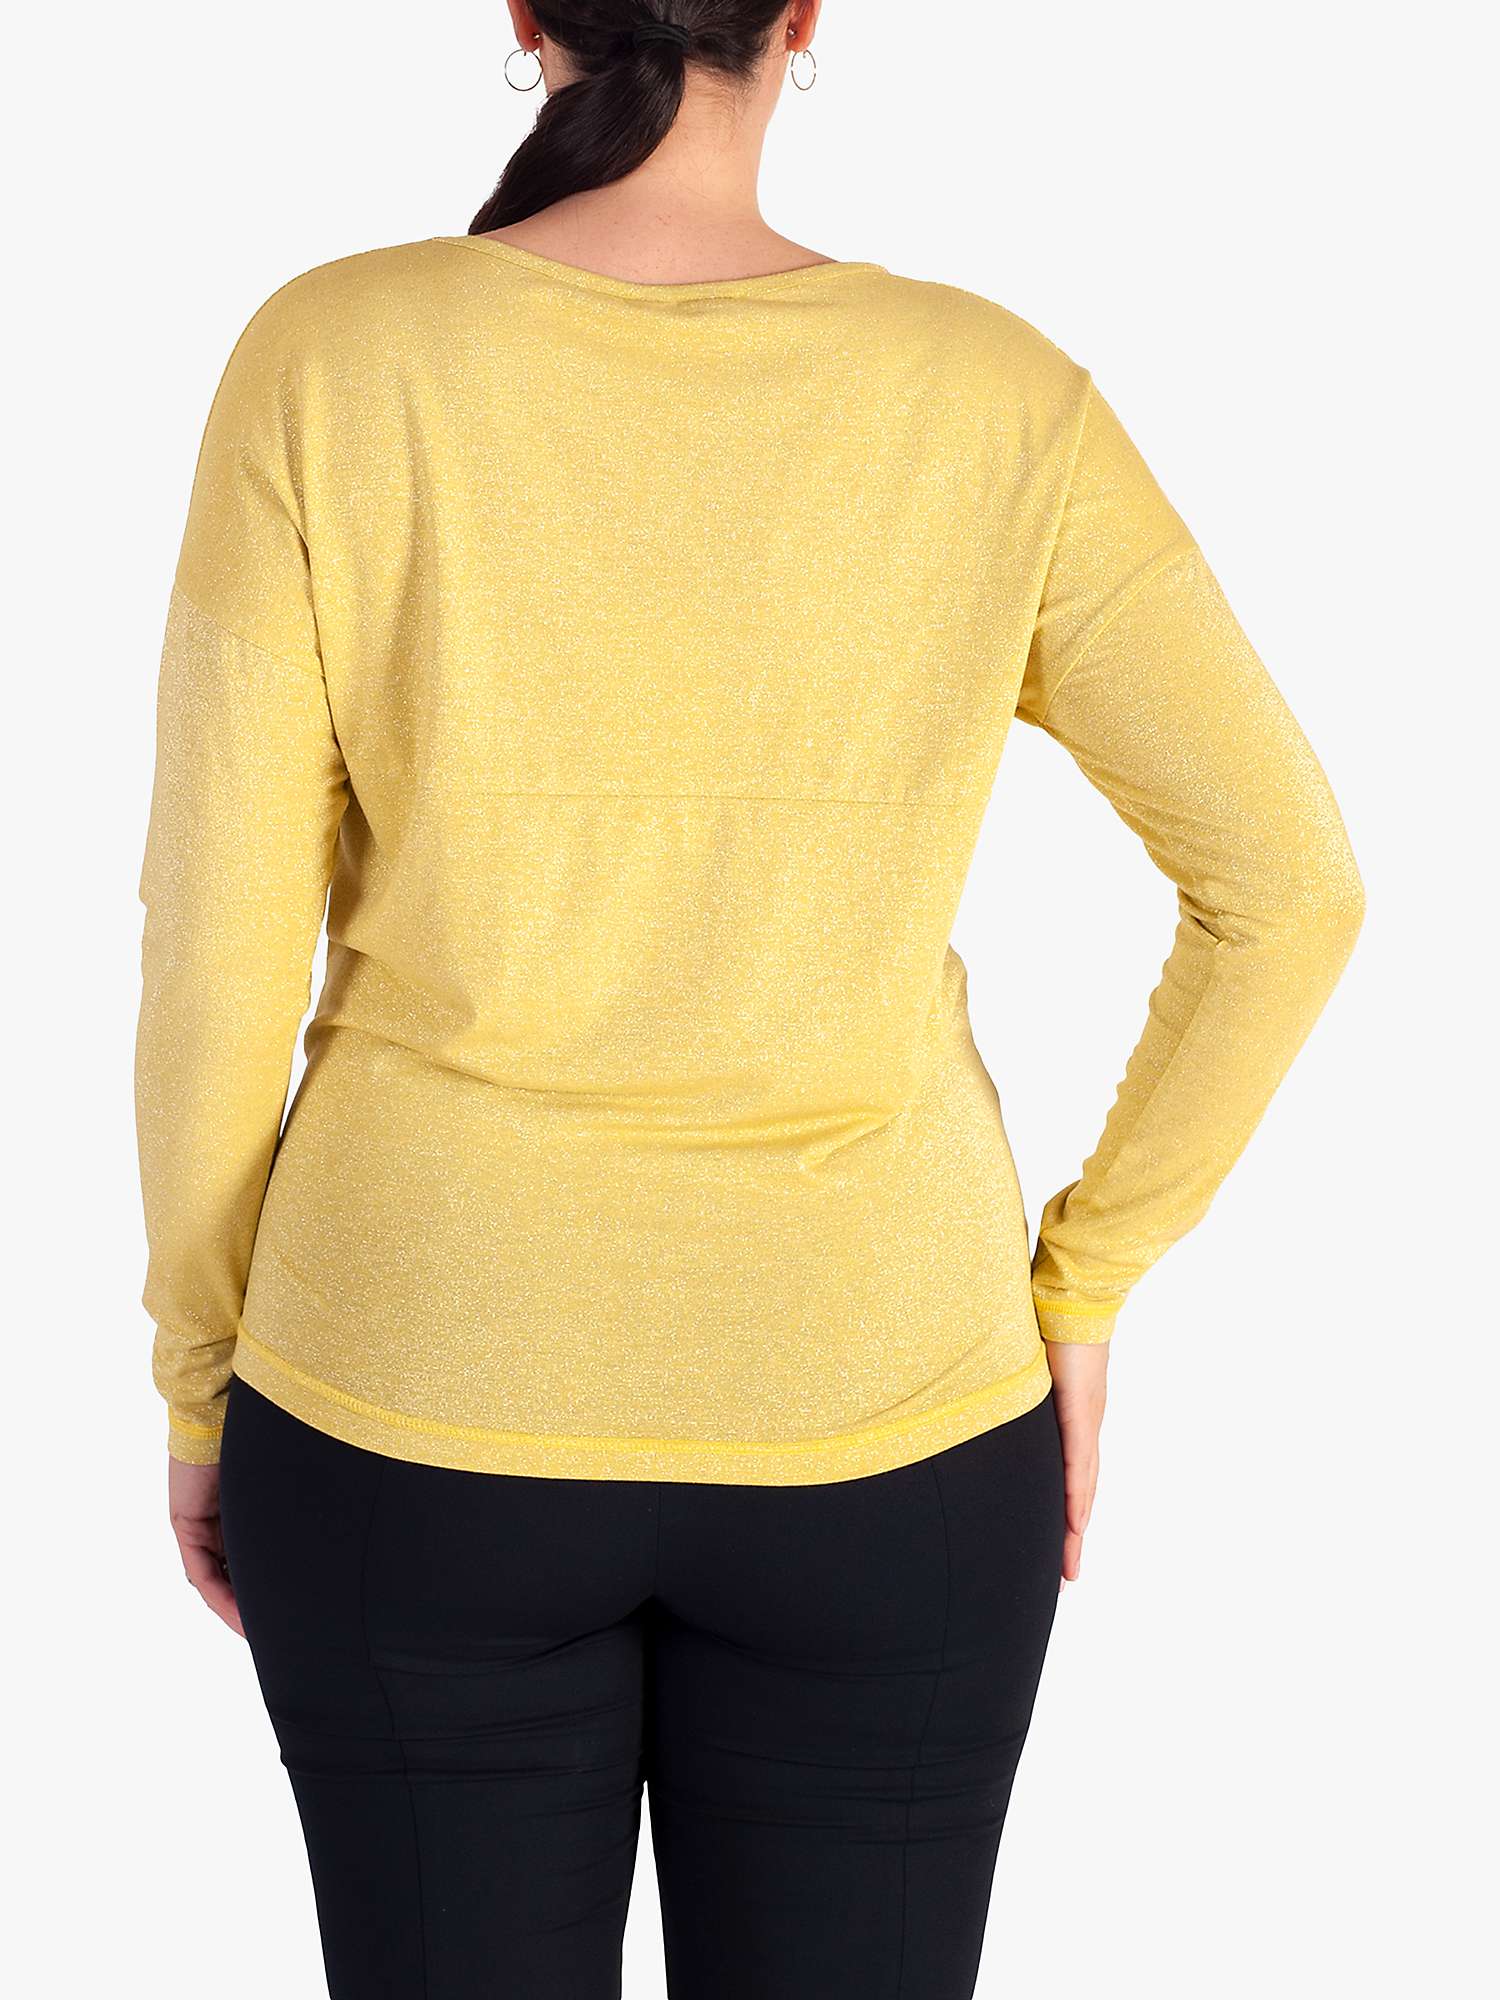 Buy chesca Glitter Jersey Top Online at johnlewis.com